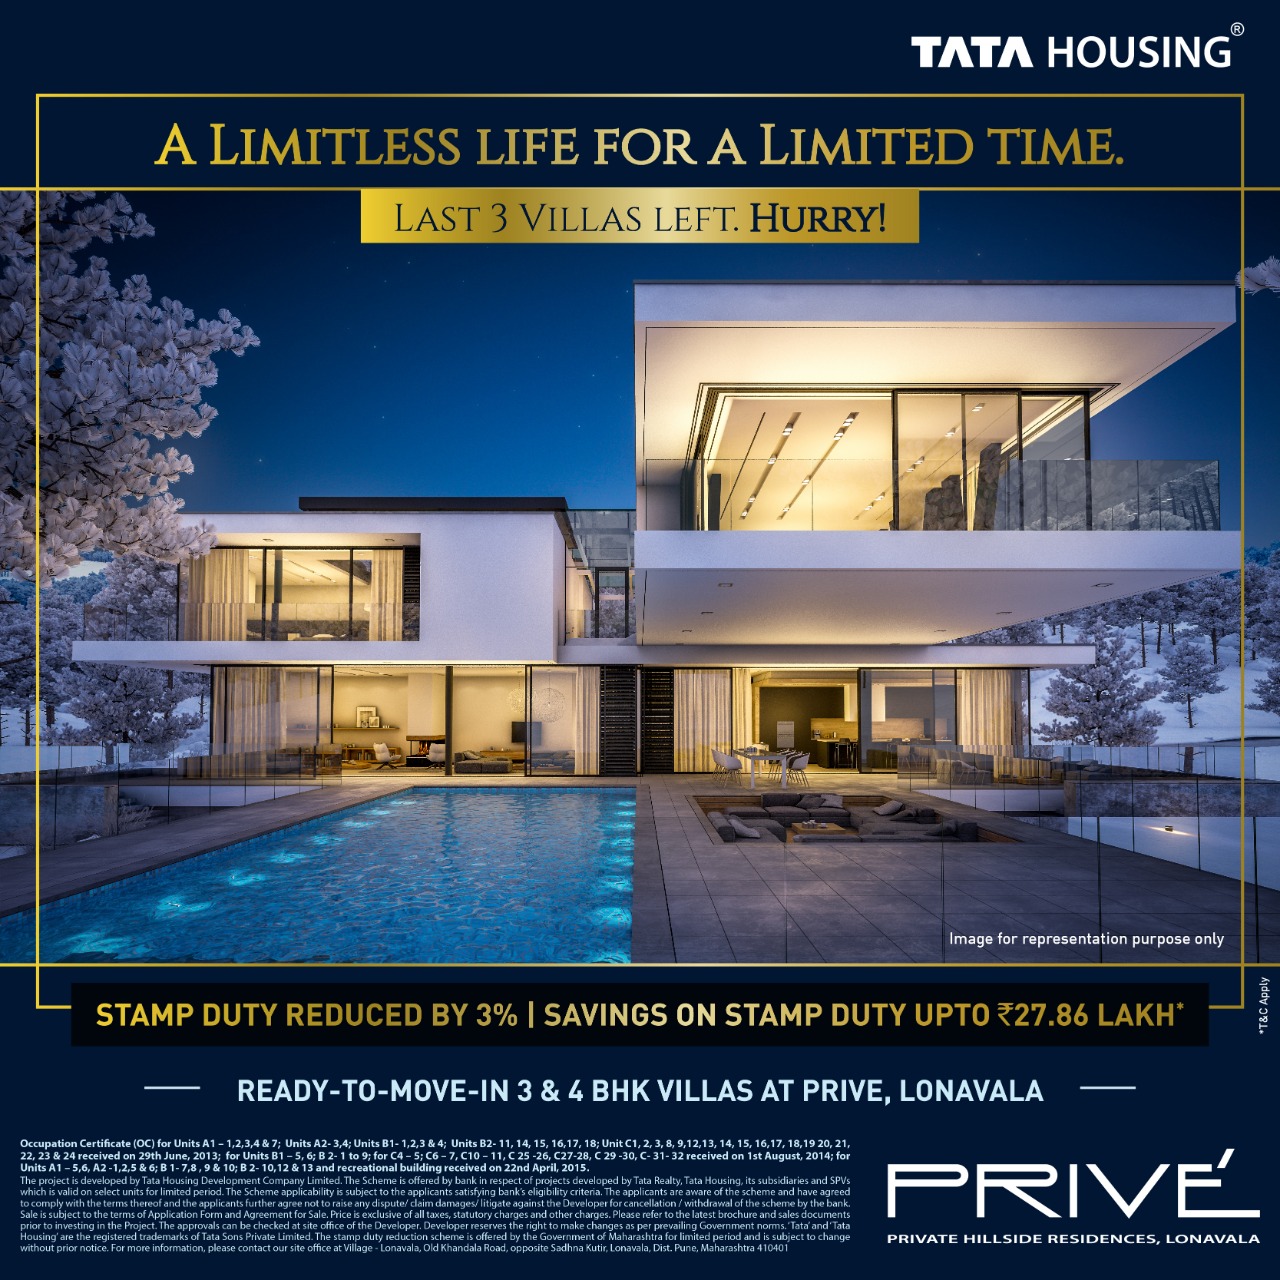 Ready to move in  3 & 4 BHK Villas  at Tata Housing Prive  in Lonavala